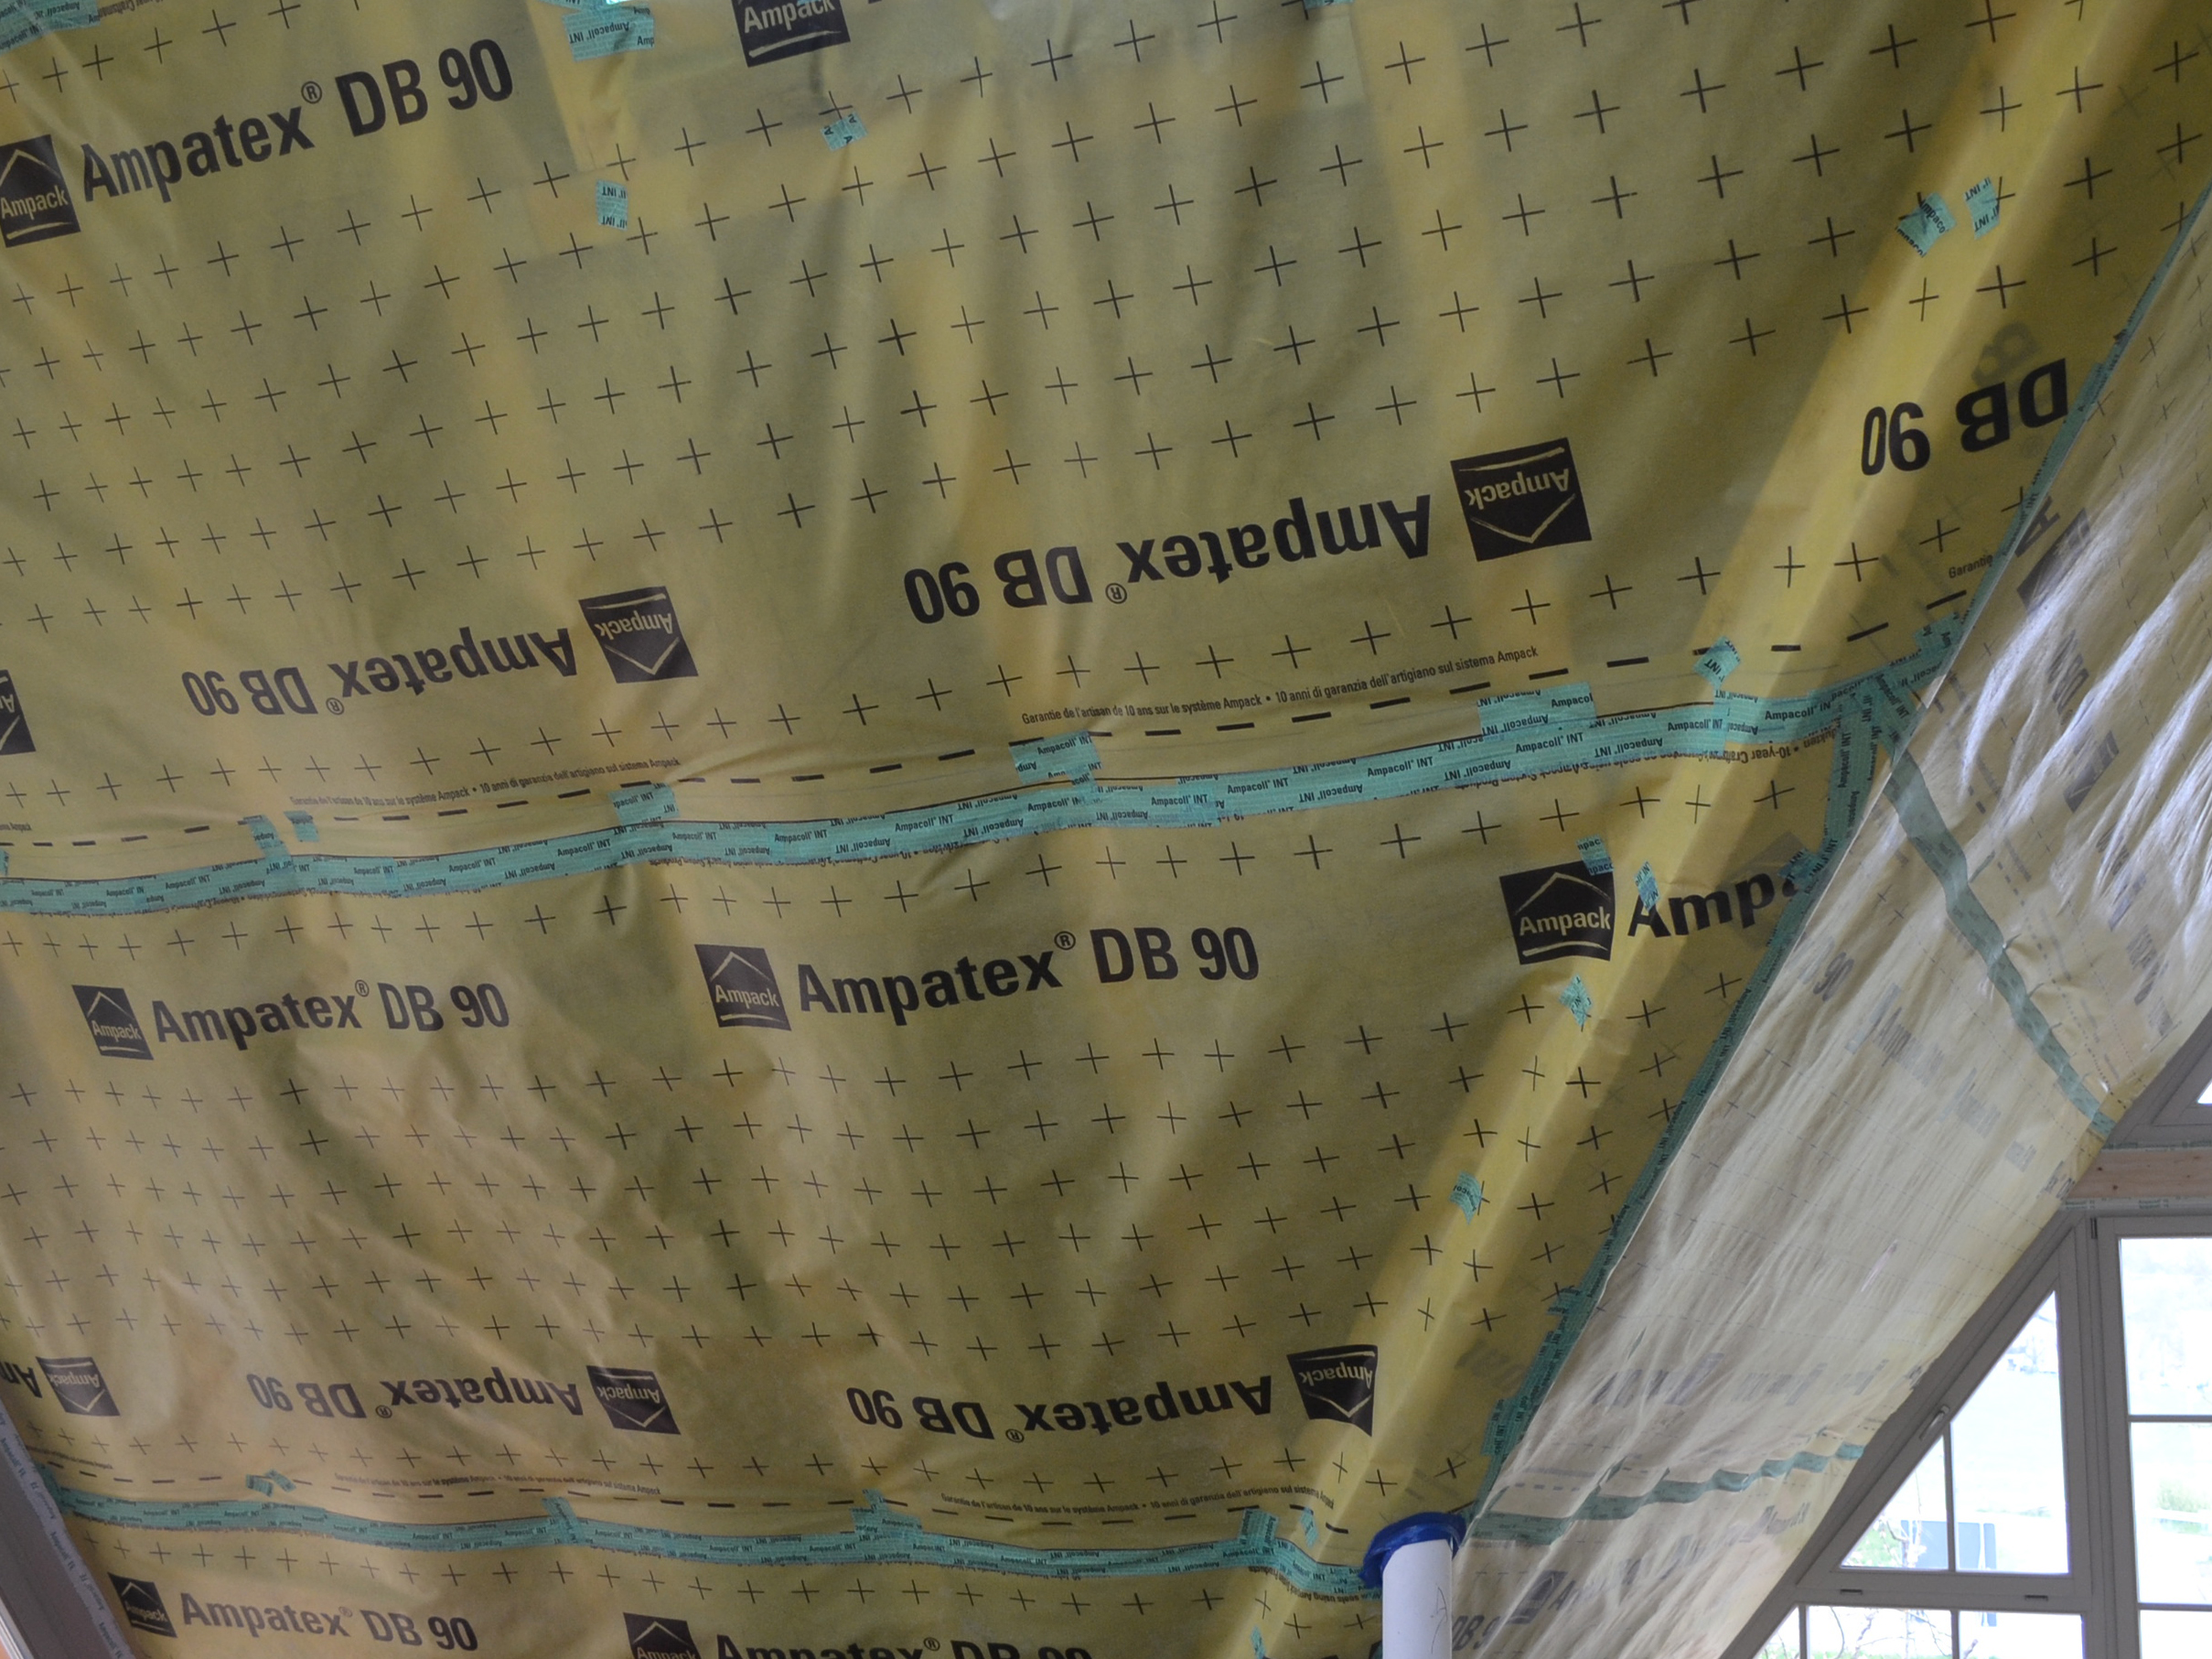 Application photo: Ampatex DB 90, vapour check and airtight layer